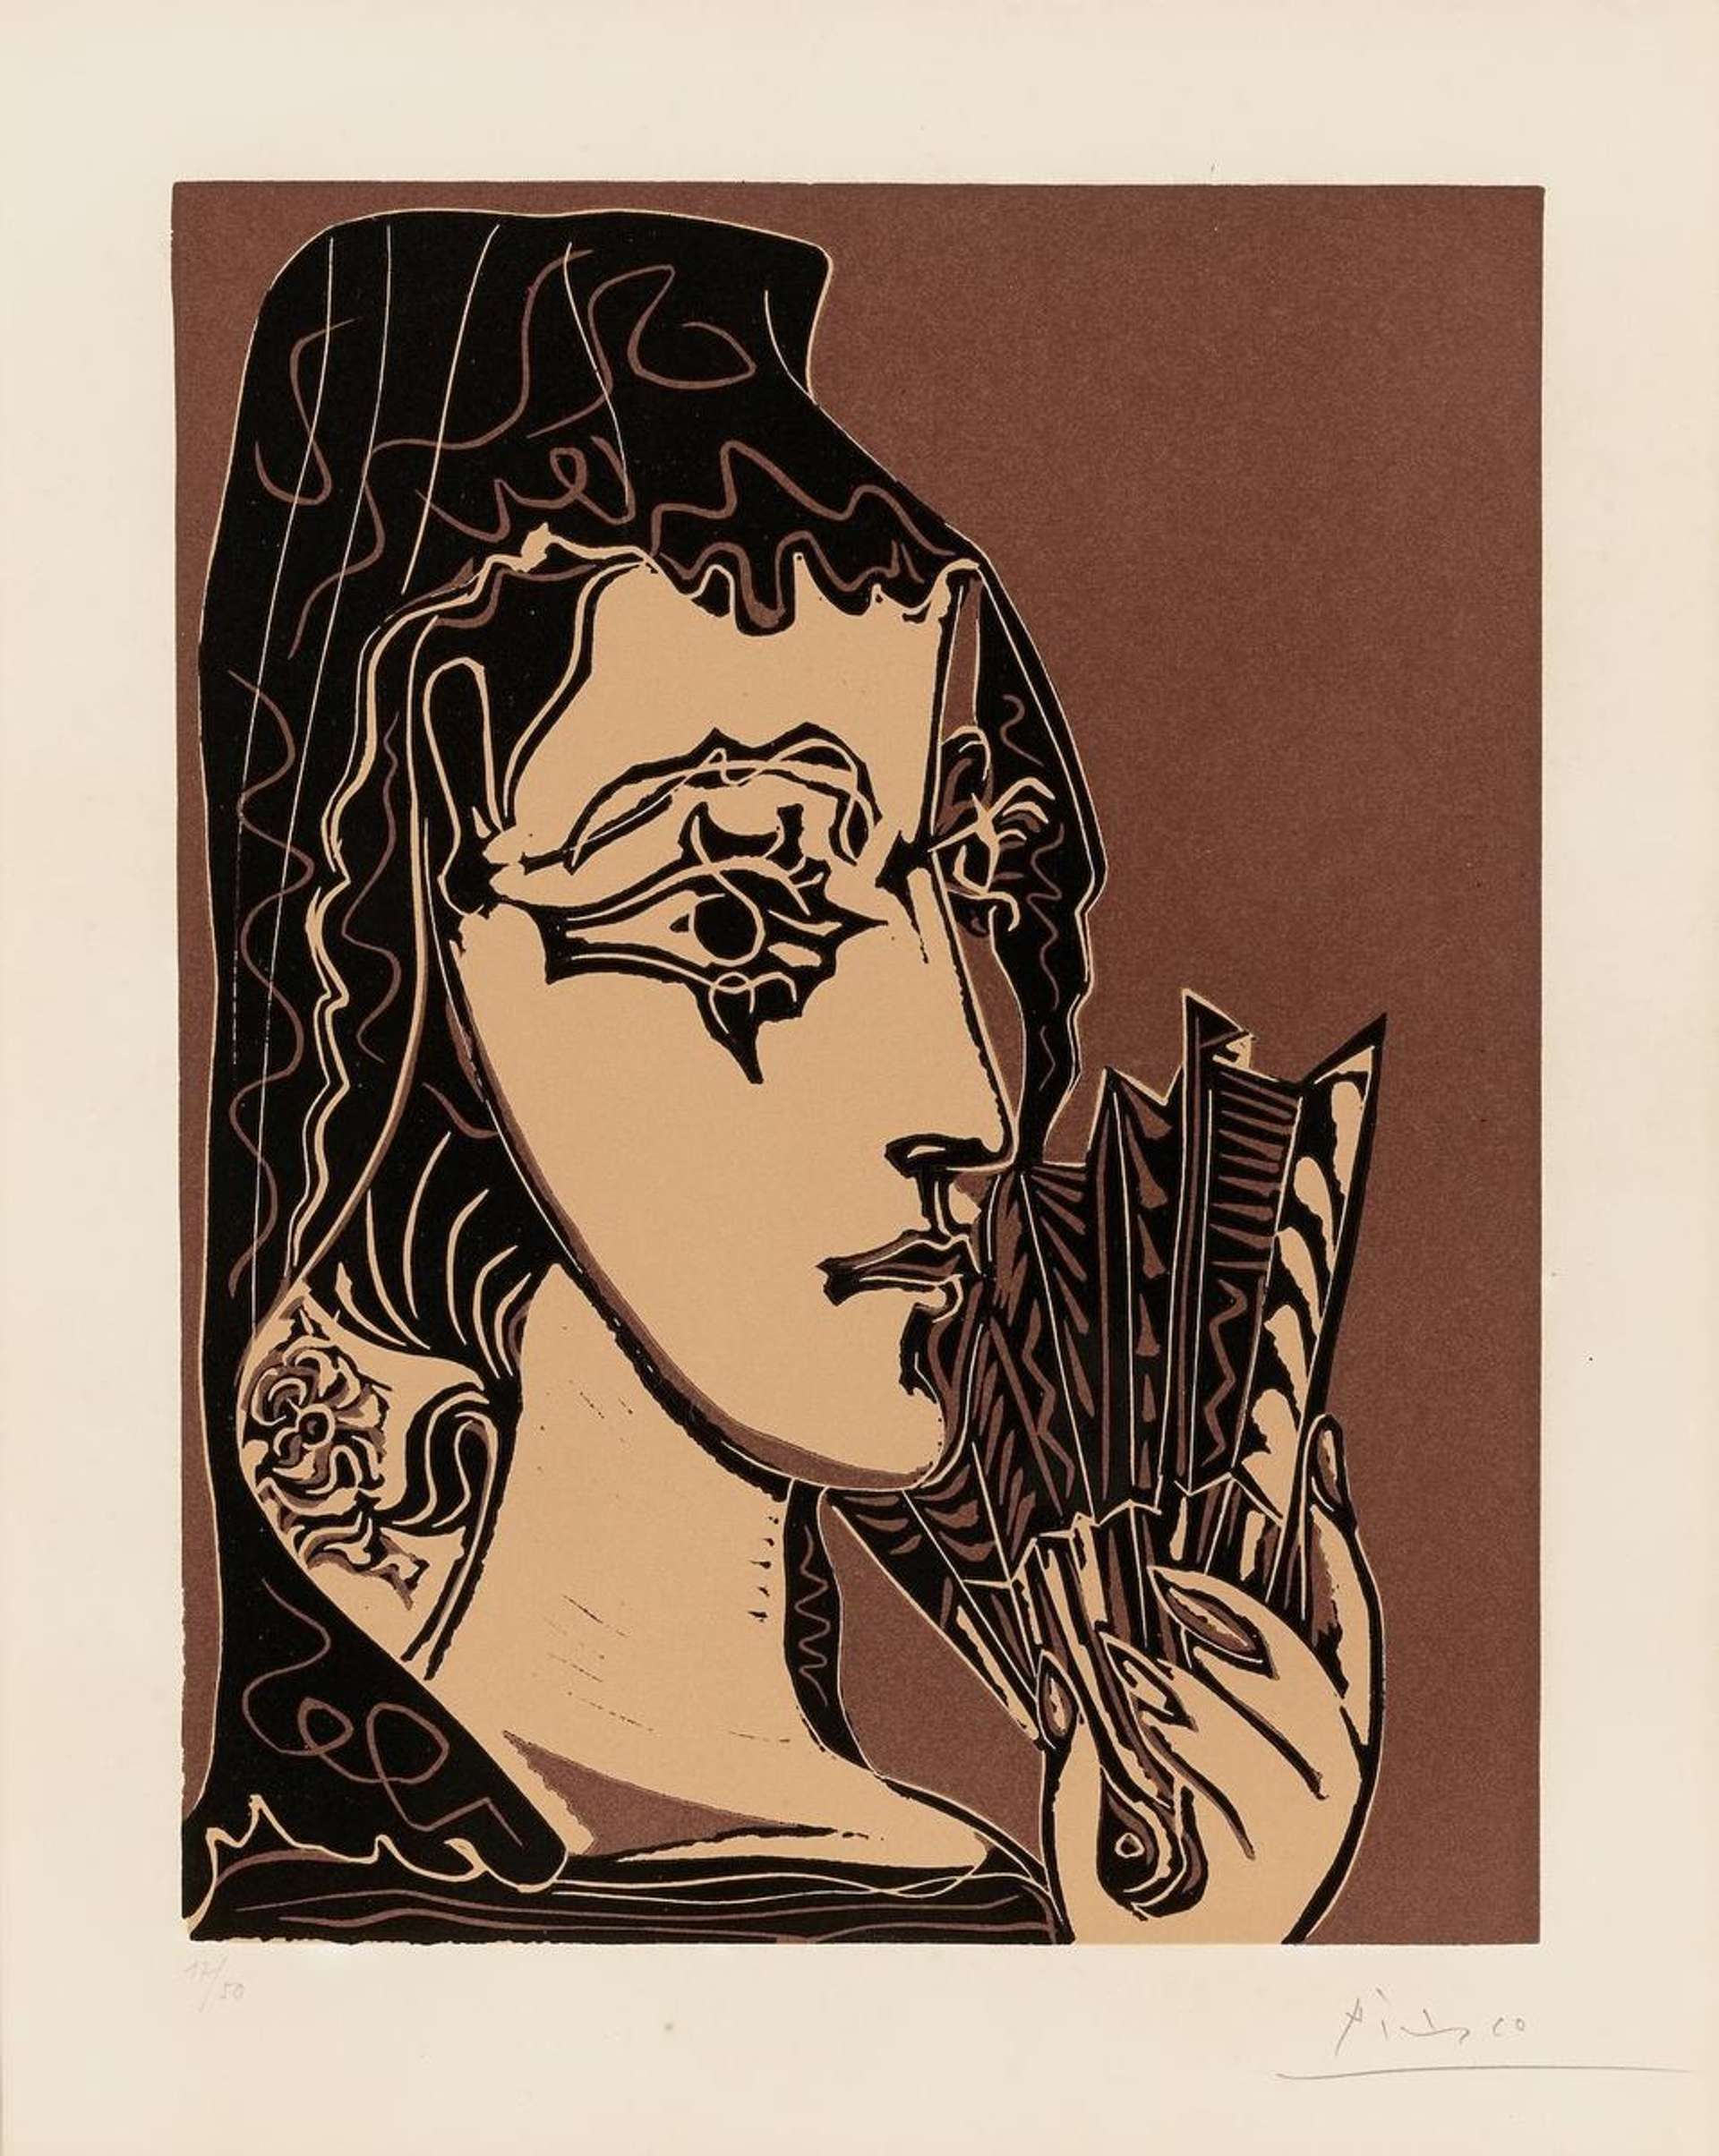 A stylised portrait of one of Picassos's muses, done in graphic lines and a muted warm colour palette. She is shown holding a fan.